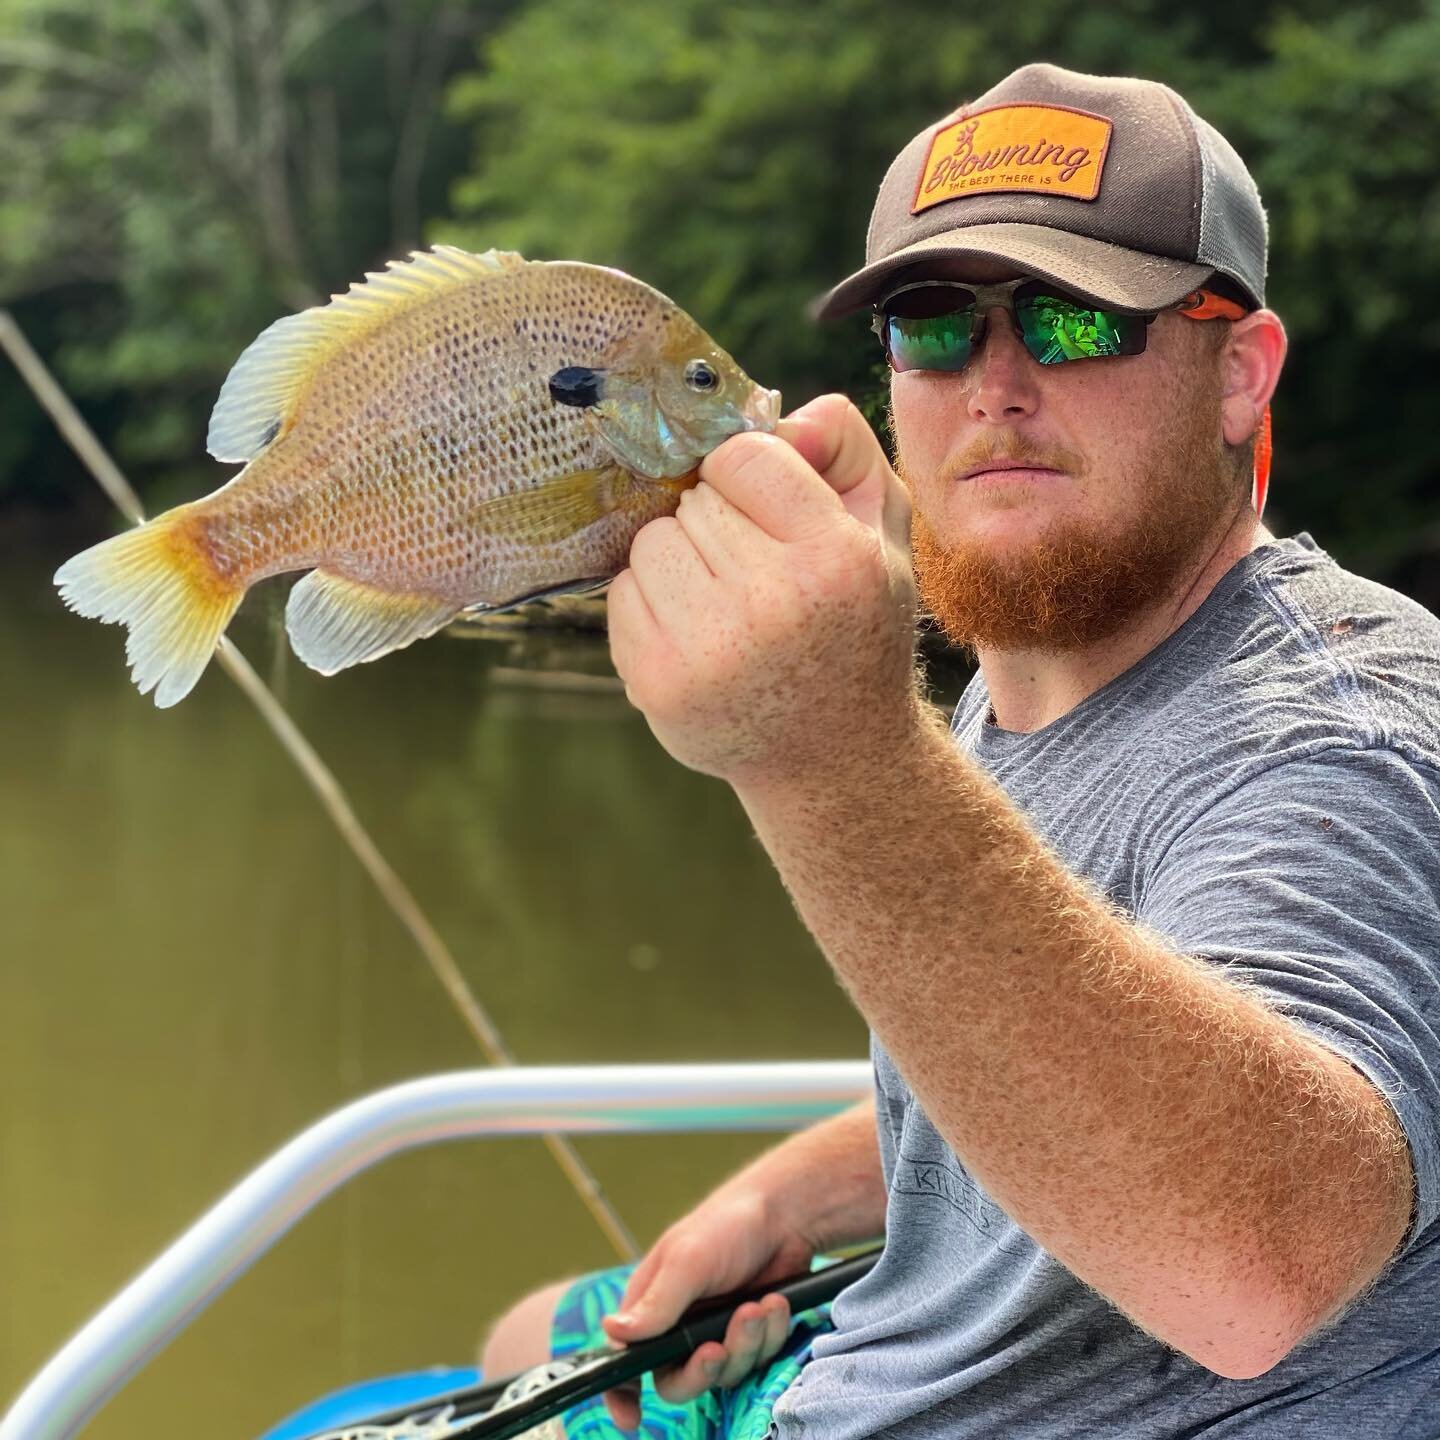 Worlds largest popper-eating sunfish. It&rsquo;s hard to appreciate the size of this beast next to @creek_guru s bear mitts #flyfishing #sunfish #bream #popper #topwater #float #river #driftboat #catchoftheday